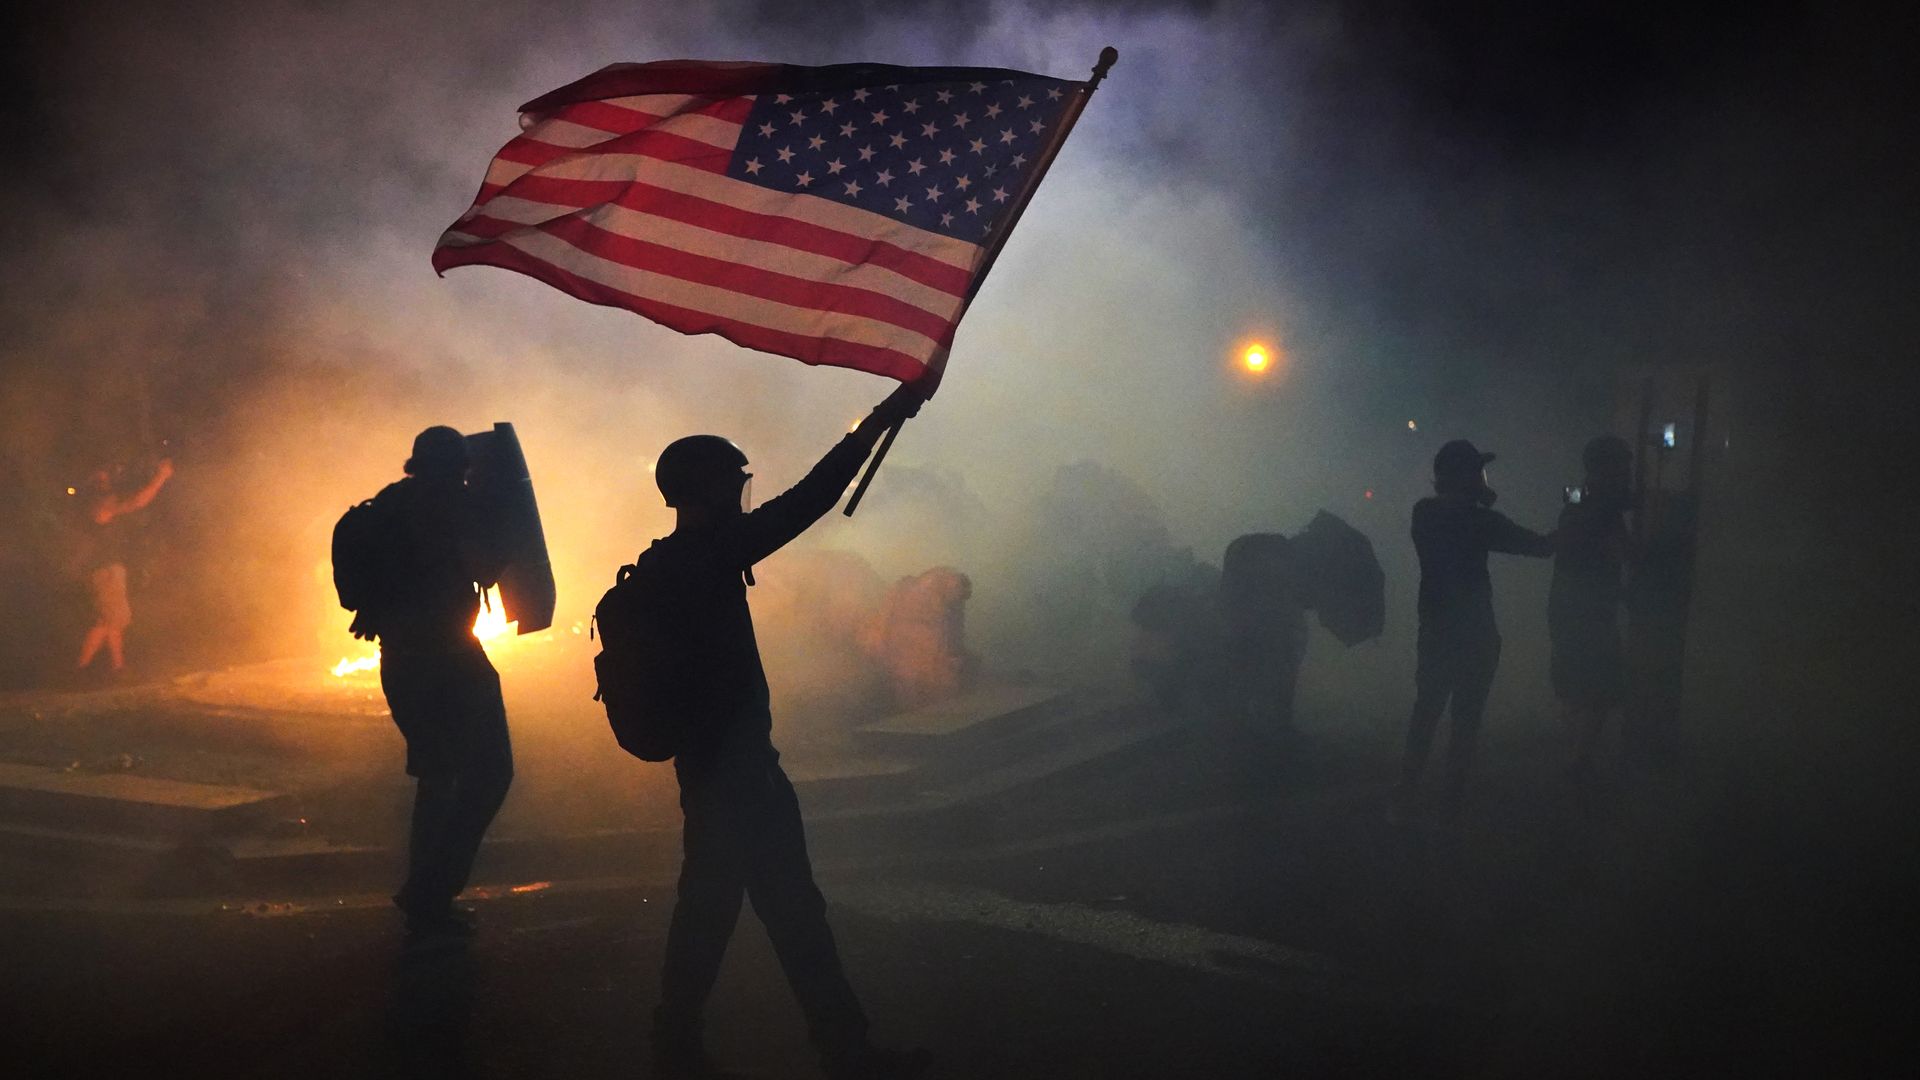 A protester flies an American flag while walking through tear gas fired by federal officers during a protest in front of the Mark O. Hatfield U.S. Courthouse on July 21, 2020 in Portland